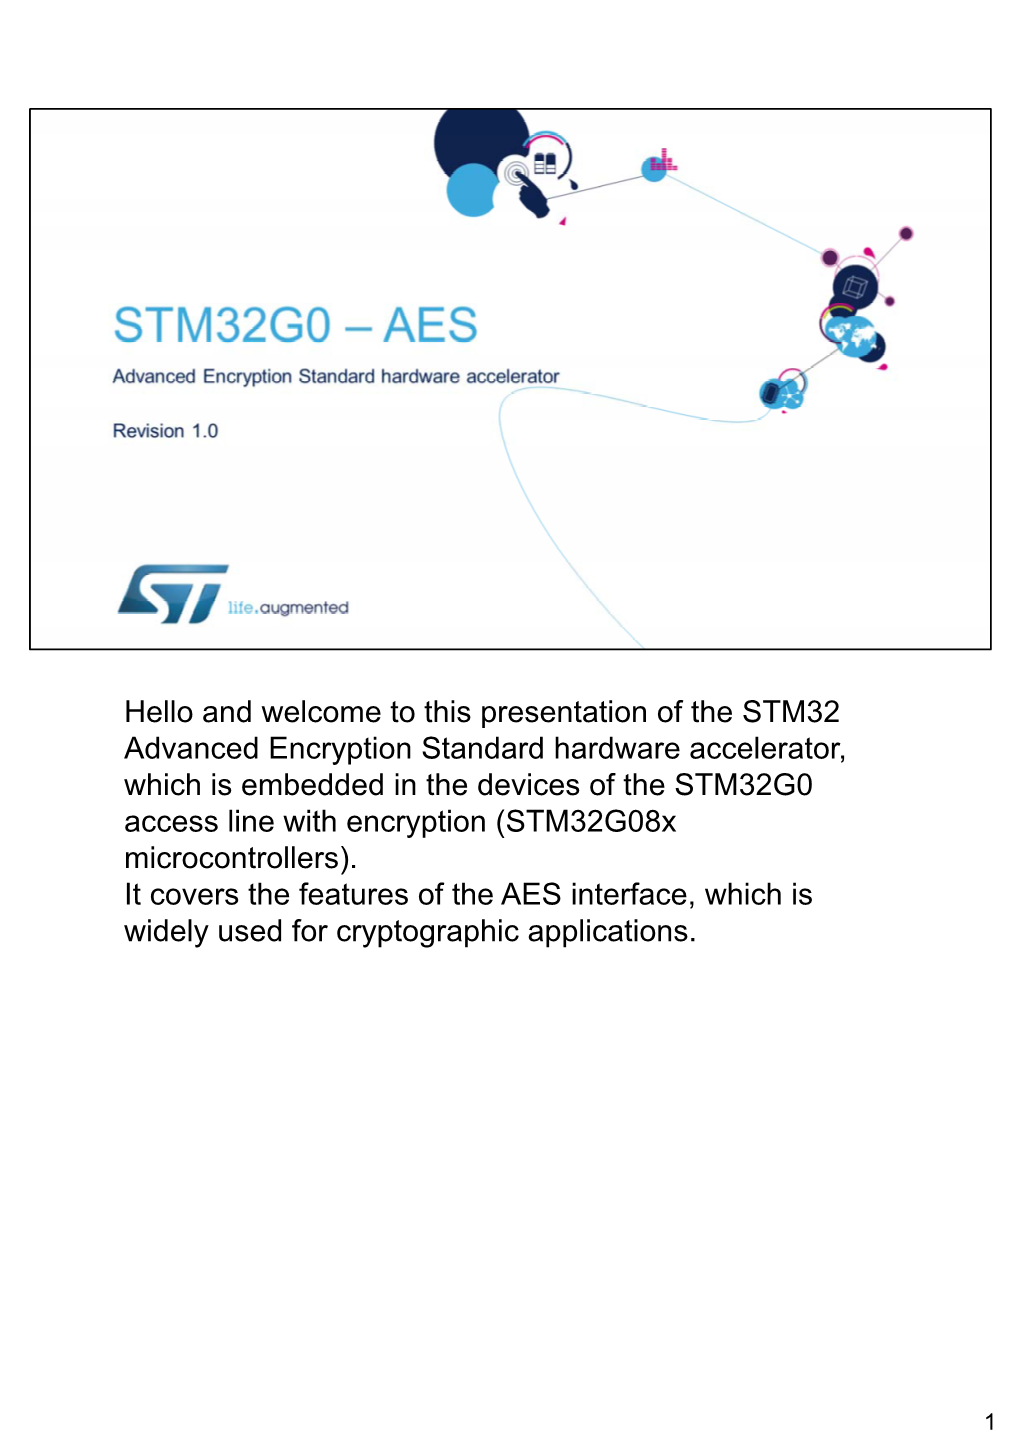 Hello and Welcome to This Presentation of the STM32